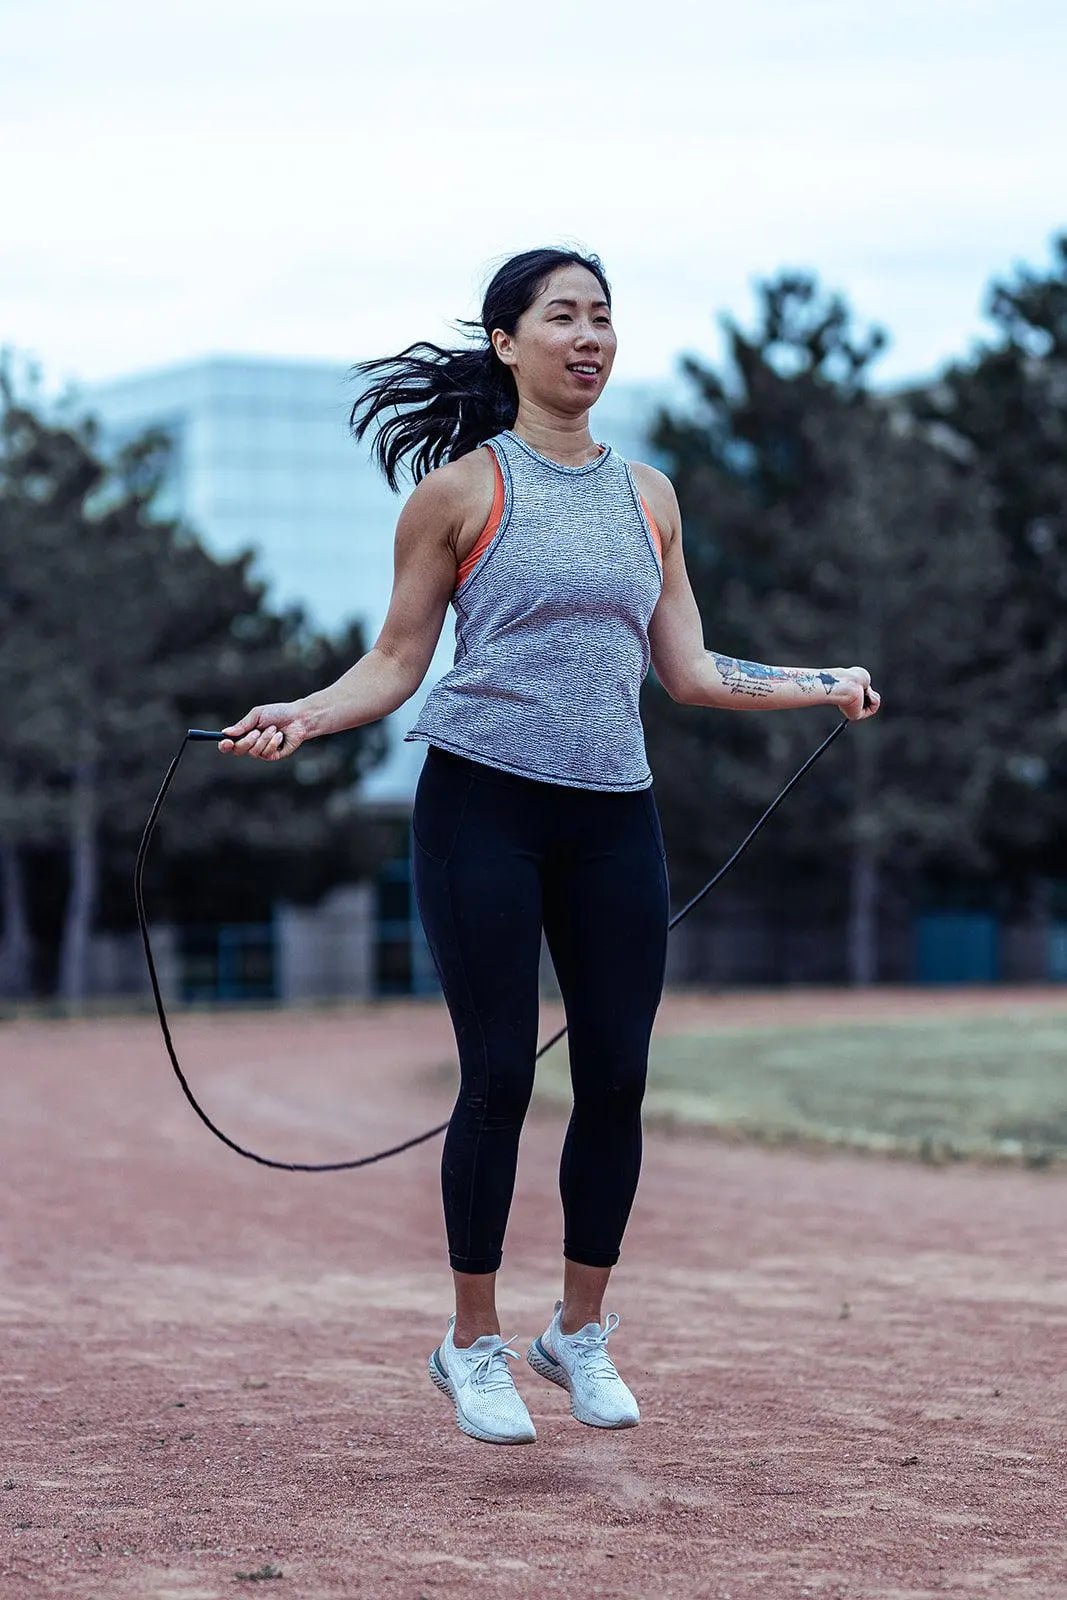 The Best 15-Minute Jump Rope Workout